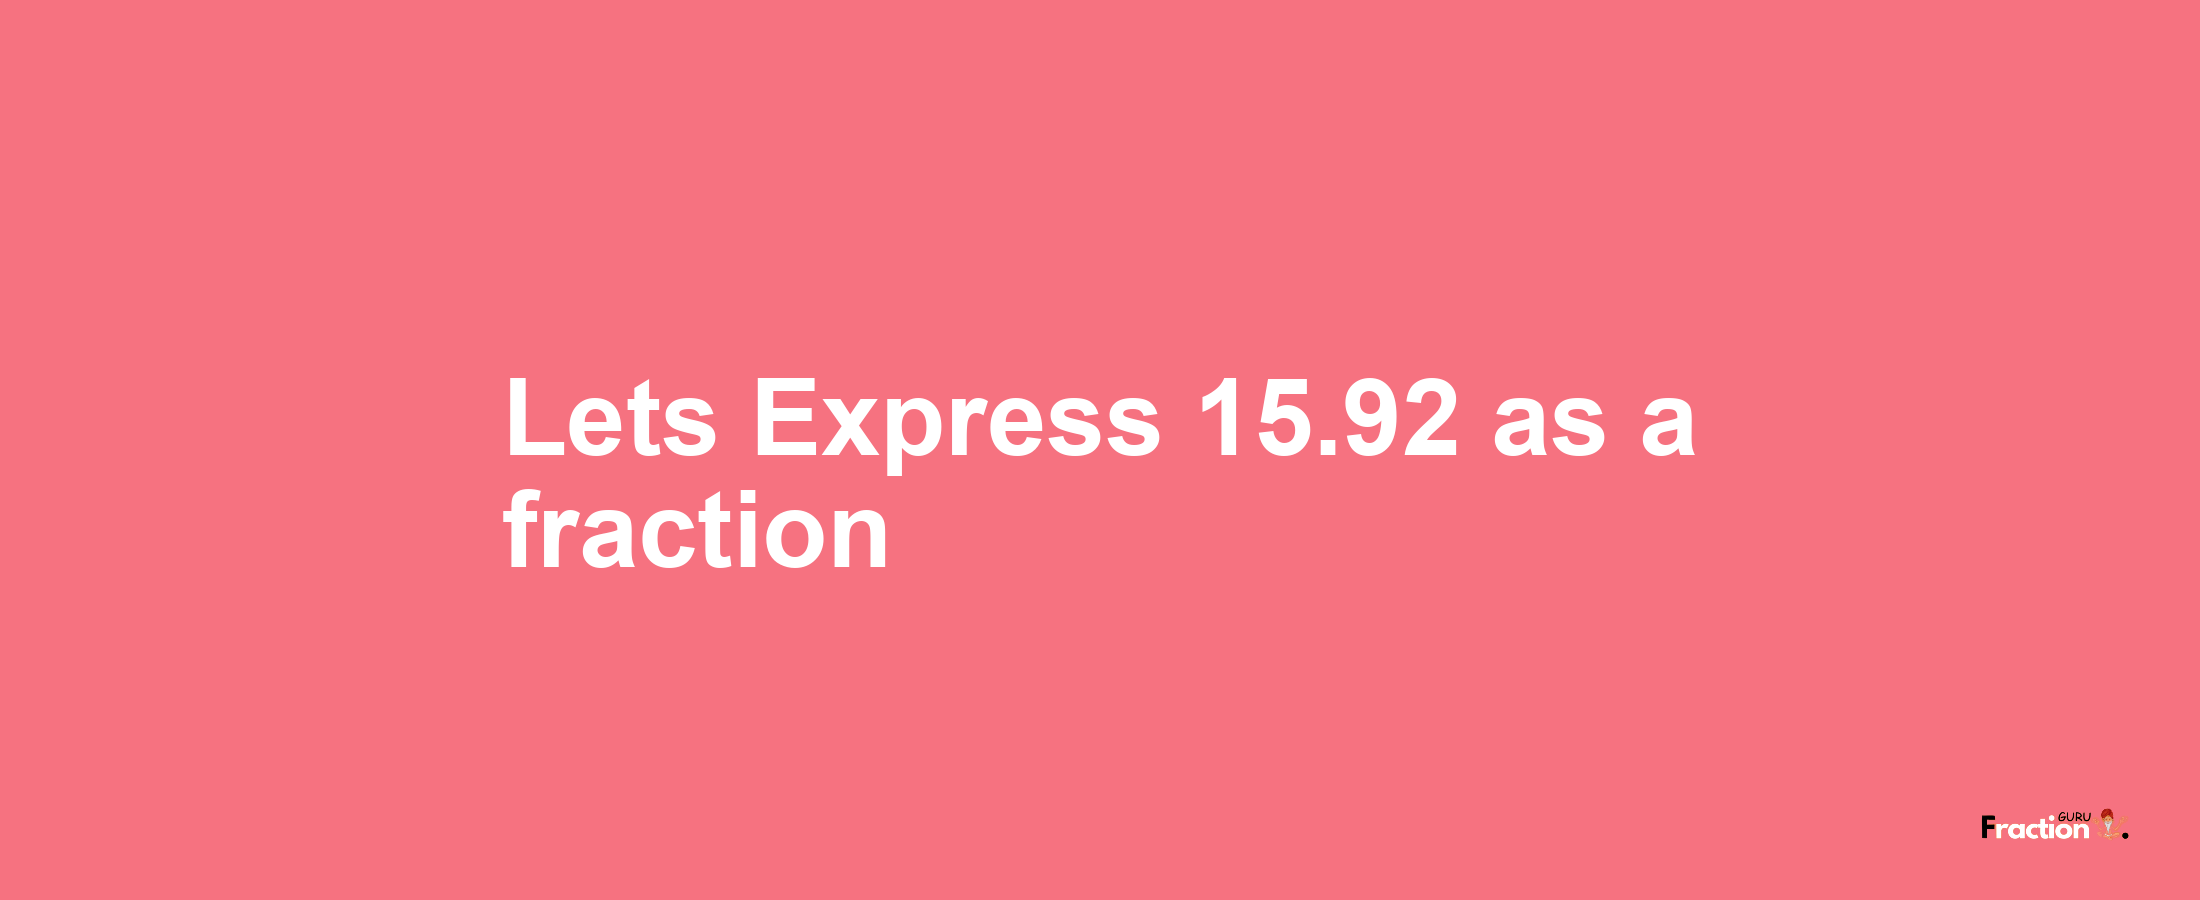 Lets Express 15.92 as afraction